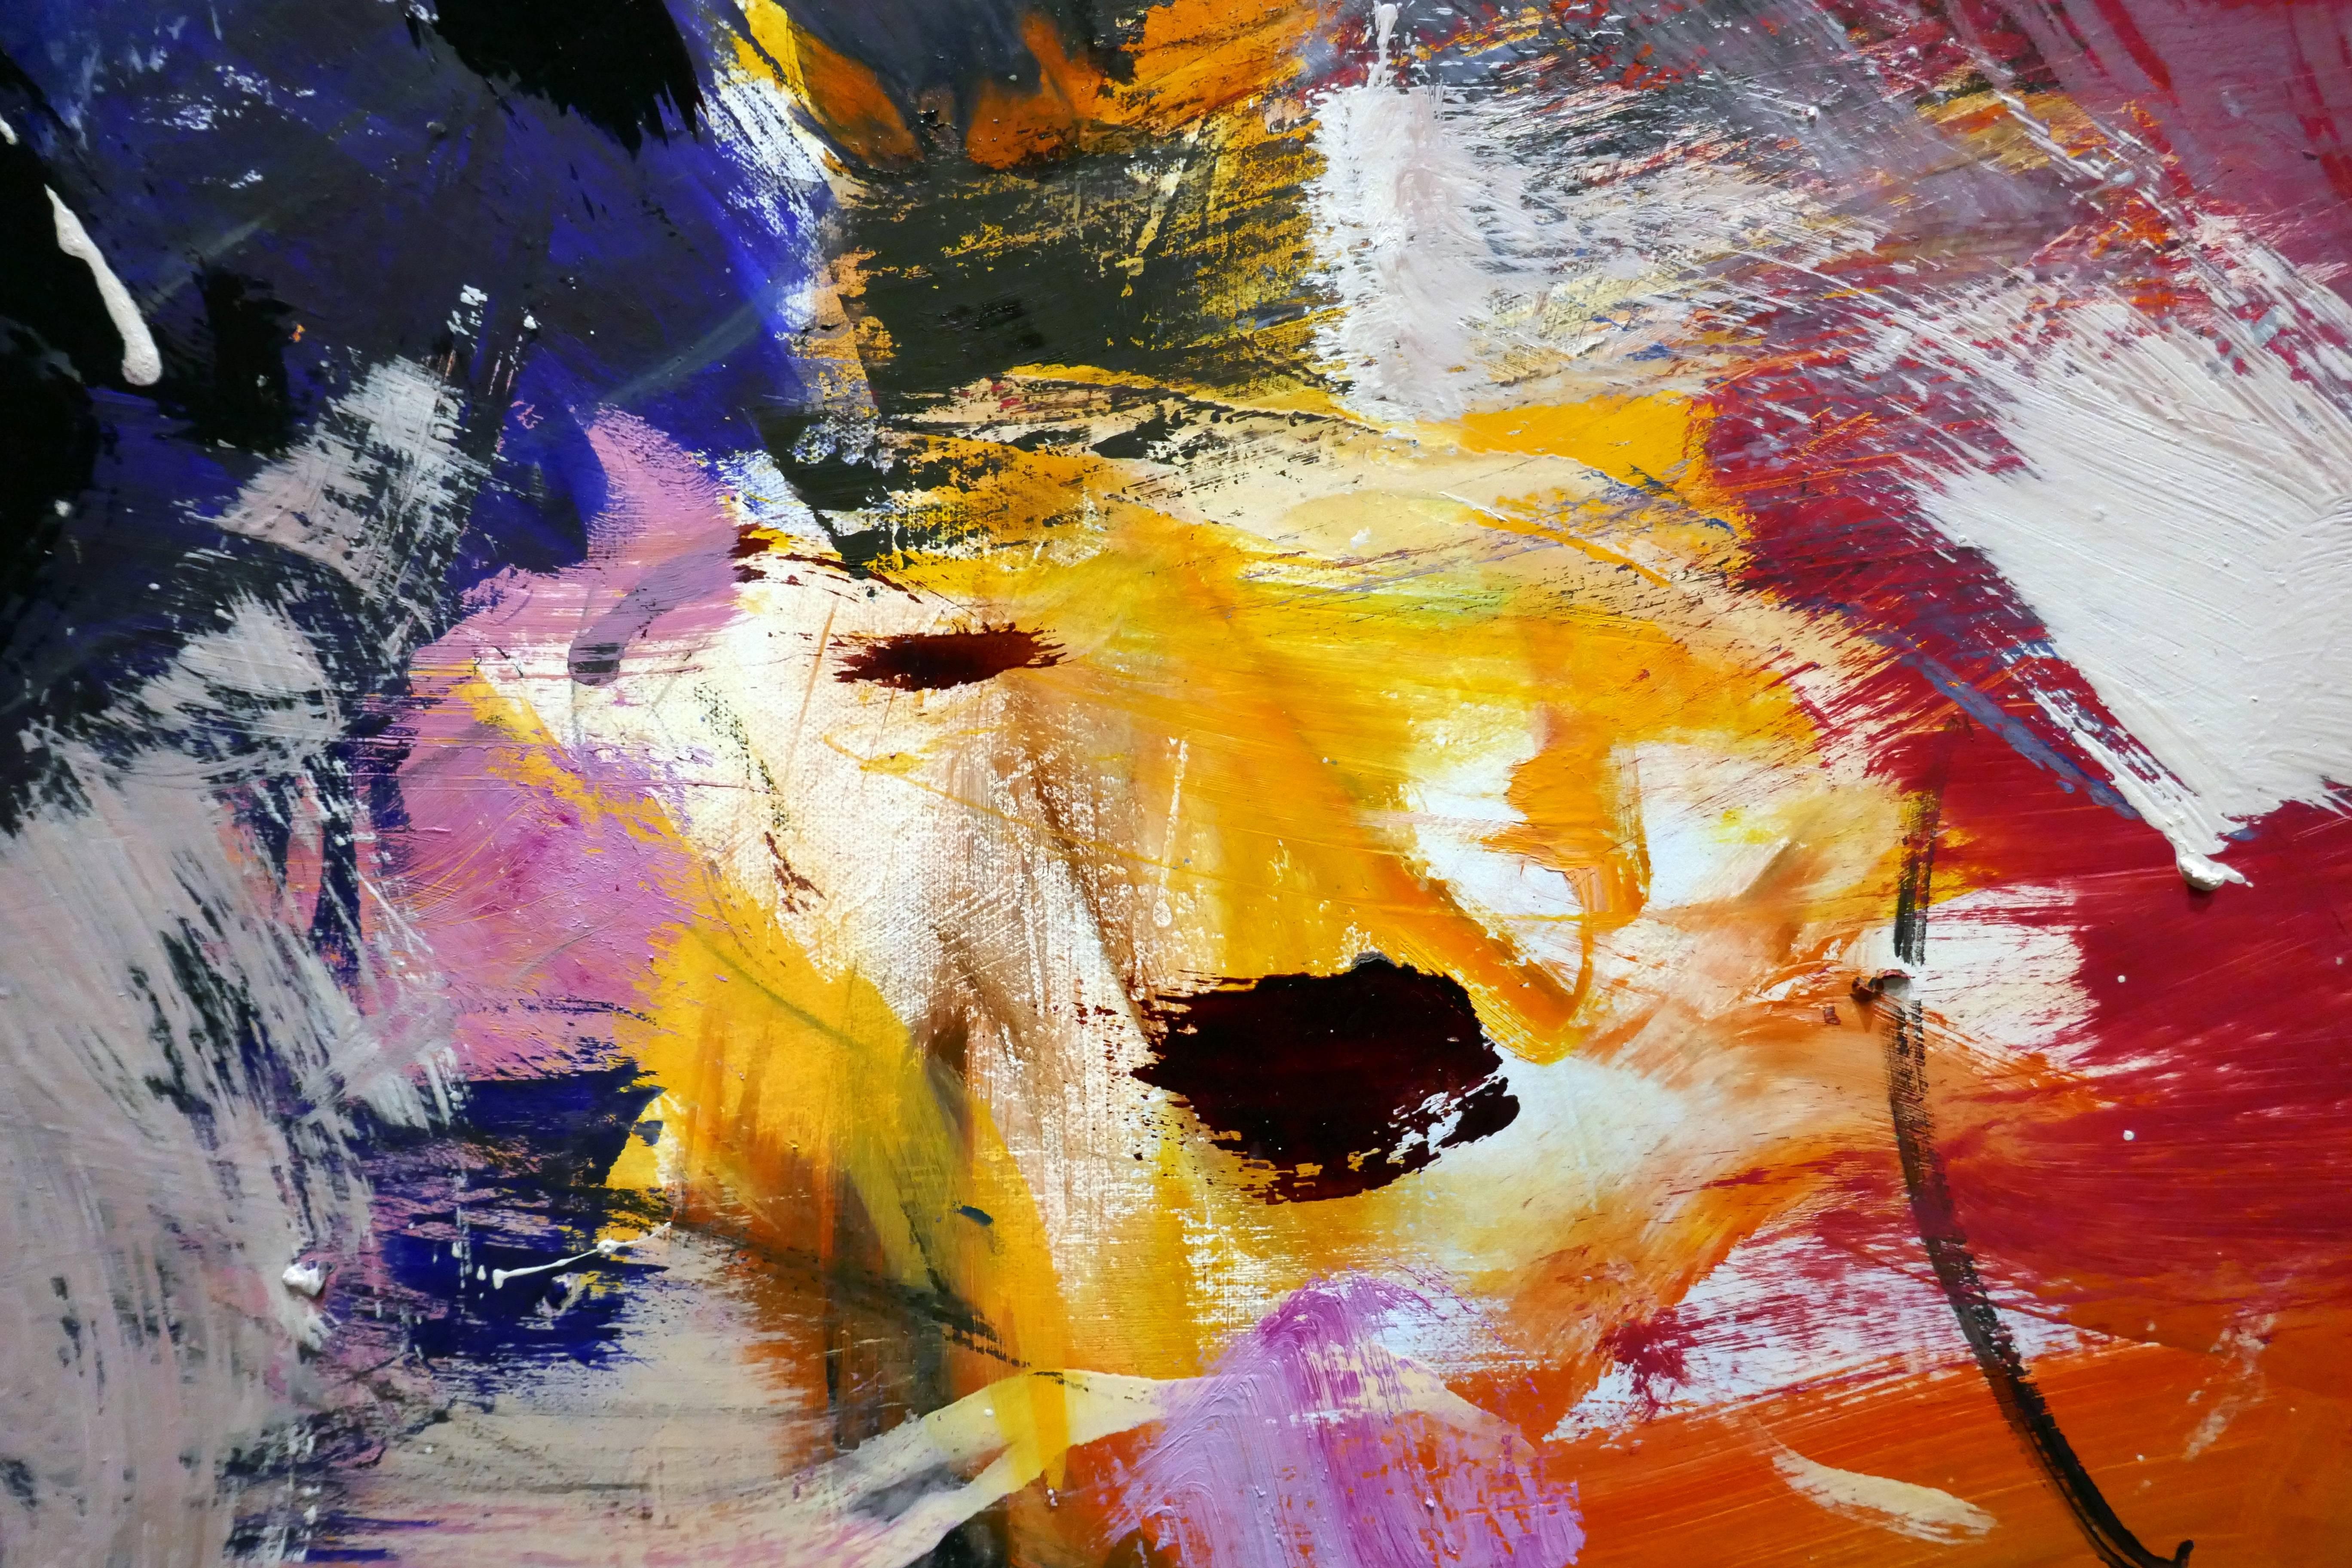 Ouvert No 11 - large, vibrant, colourful, gestural abstract, oil on canvas 1